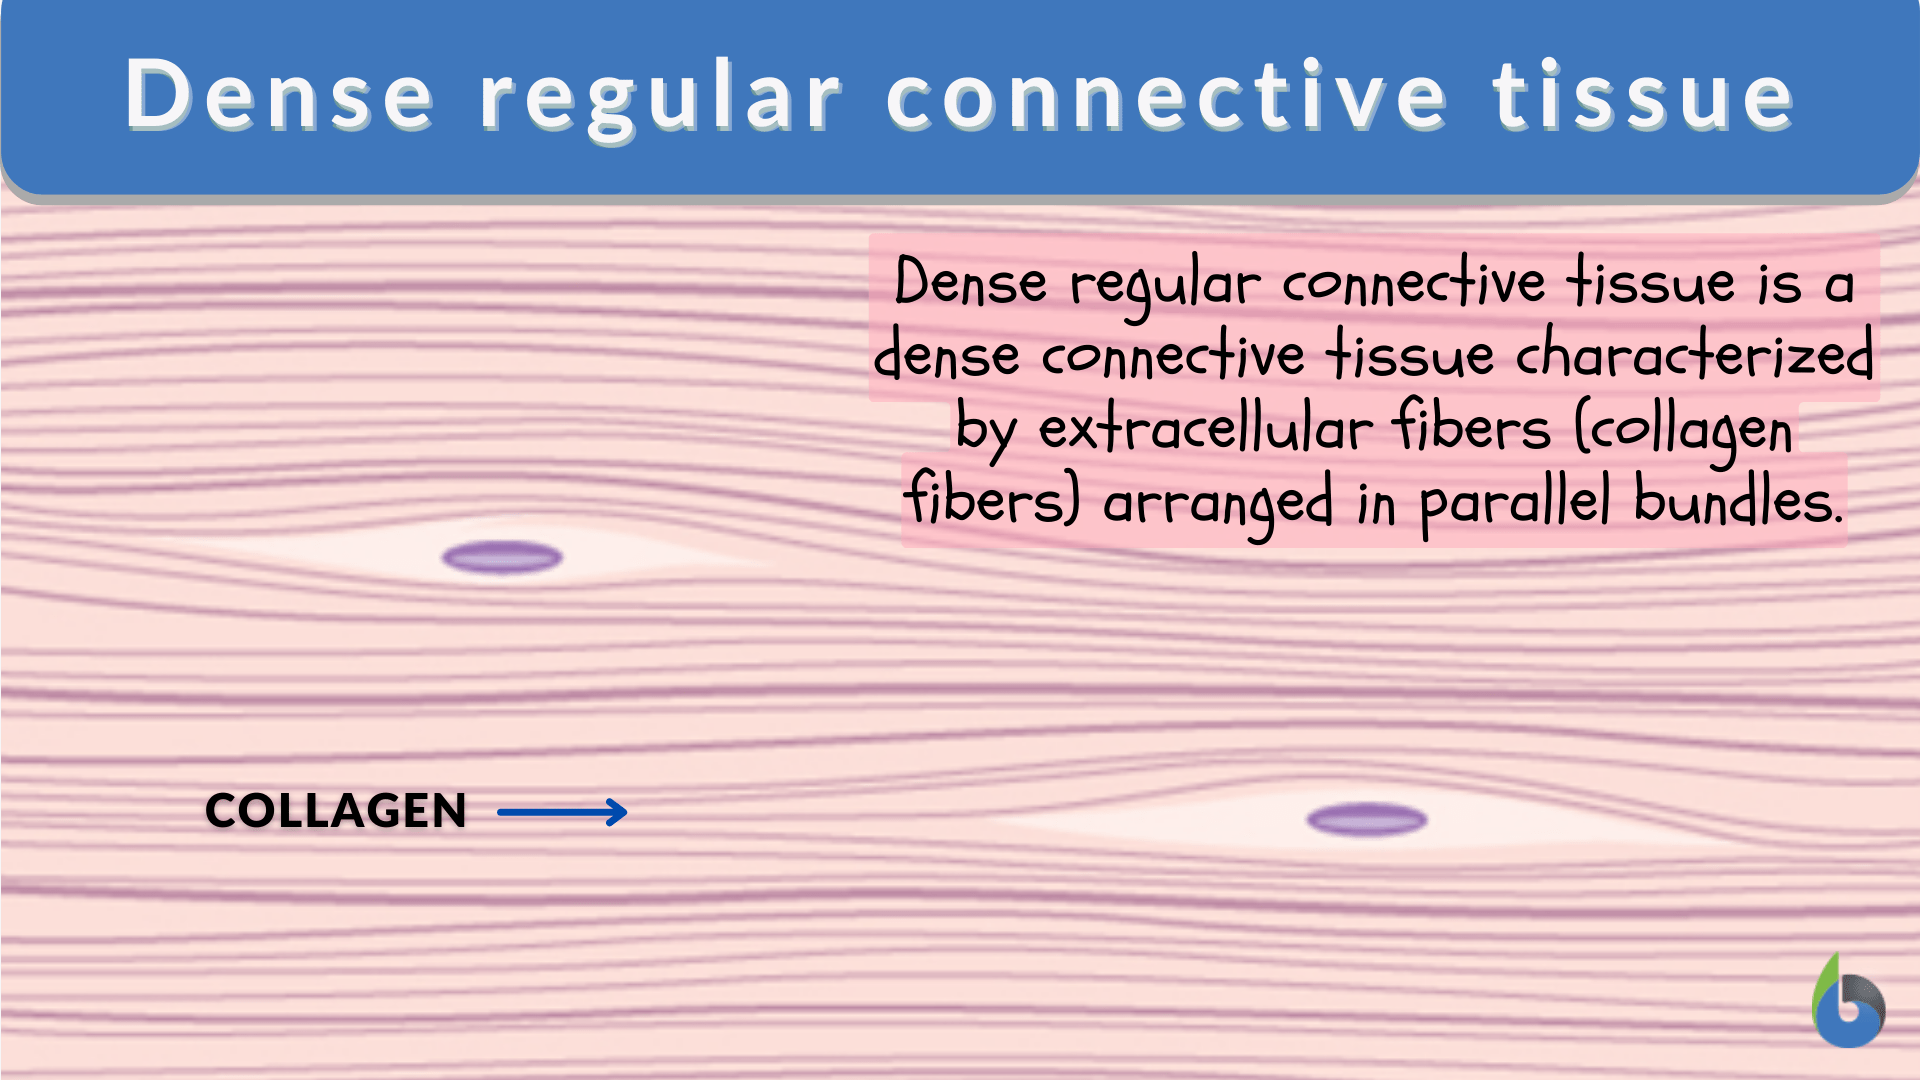 Dense regular connective - and Examples - Biology Online Dictionary